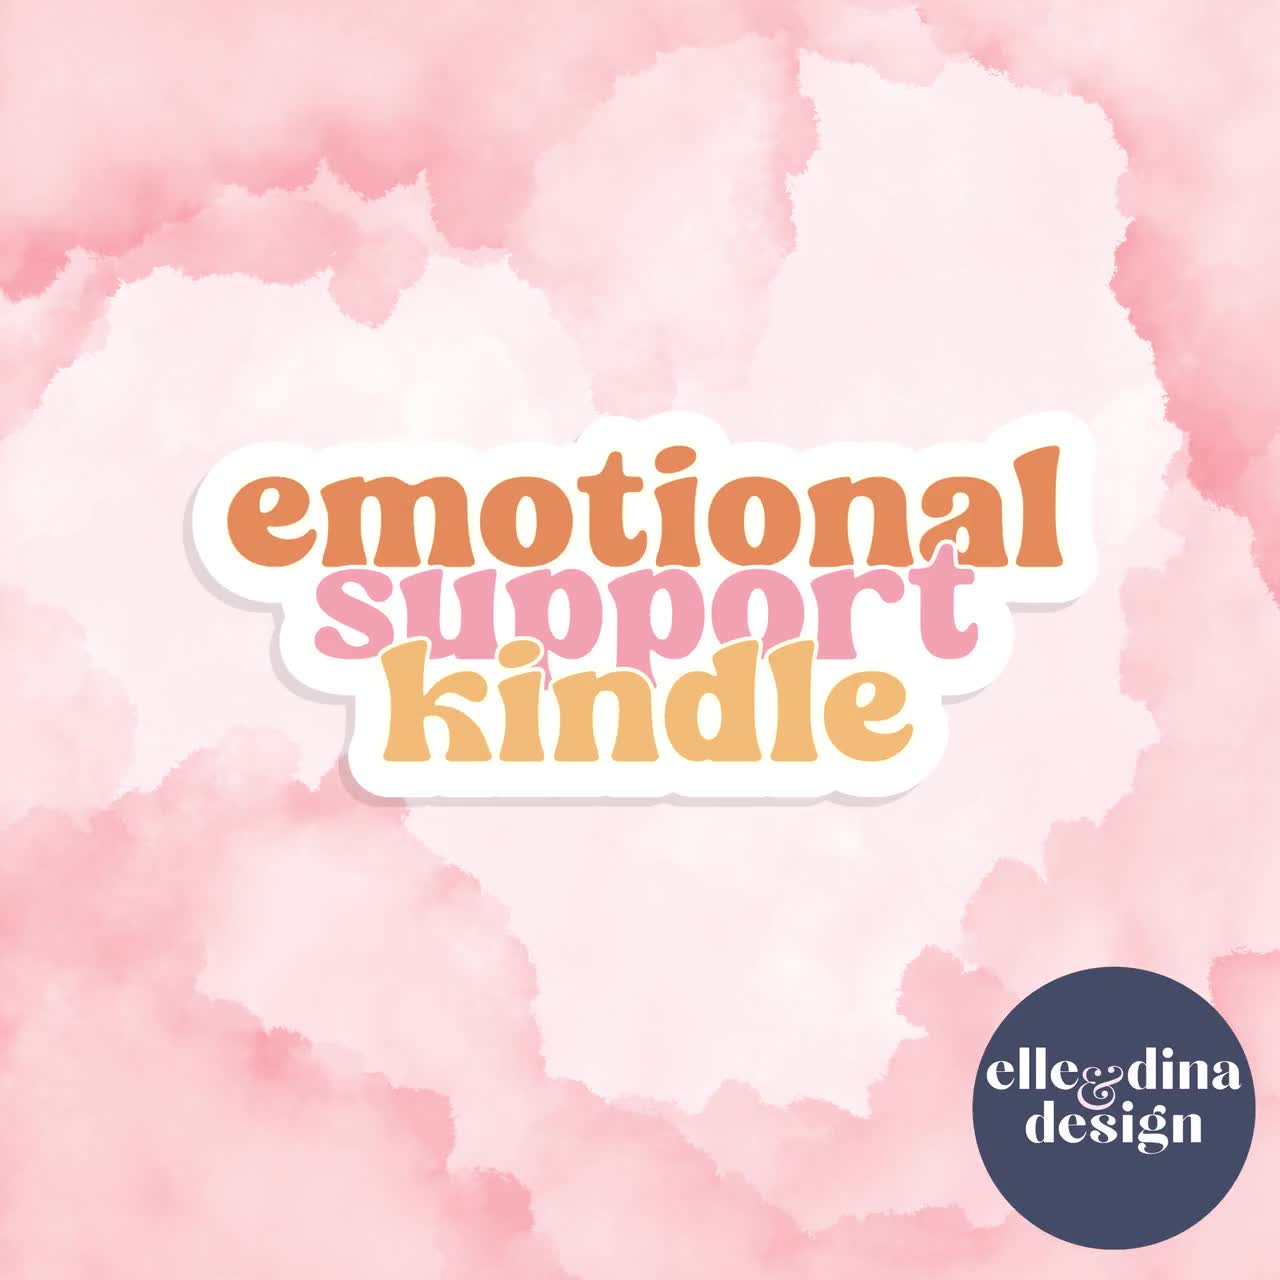 Emotional Support Kindle Sticker, Kindle Sticker, Bookish Gift